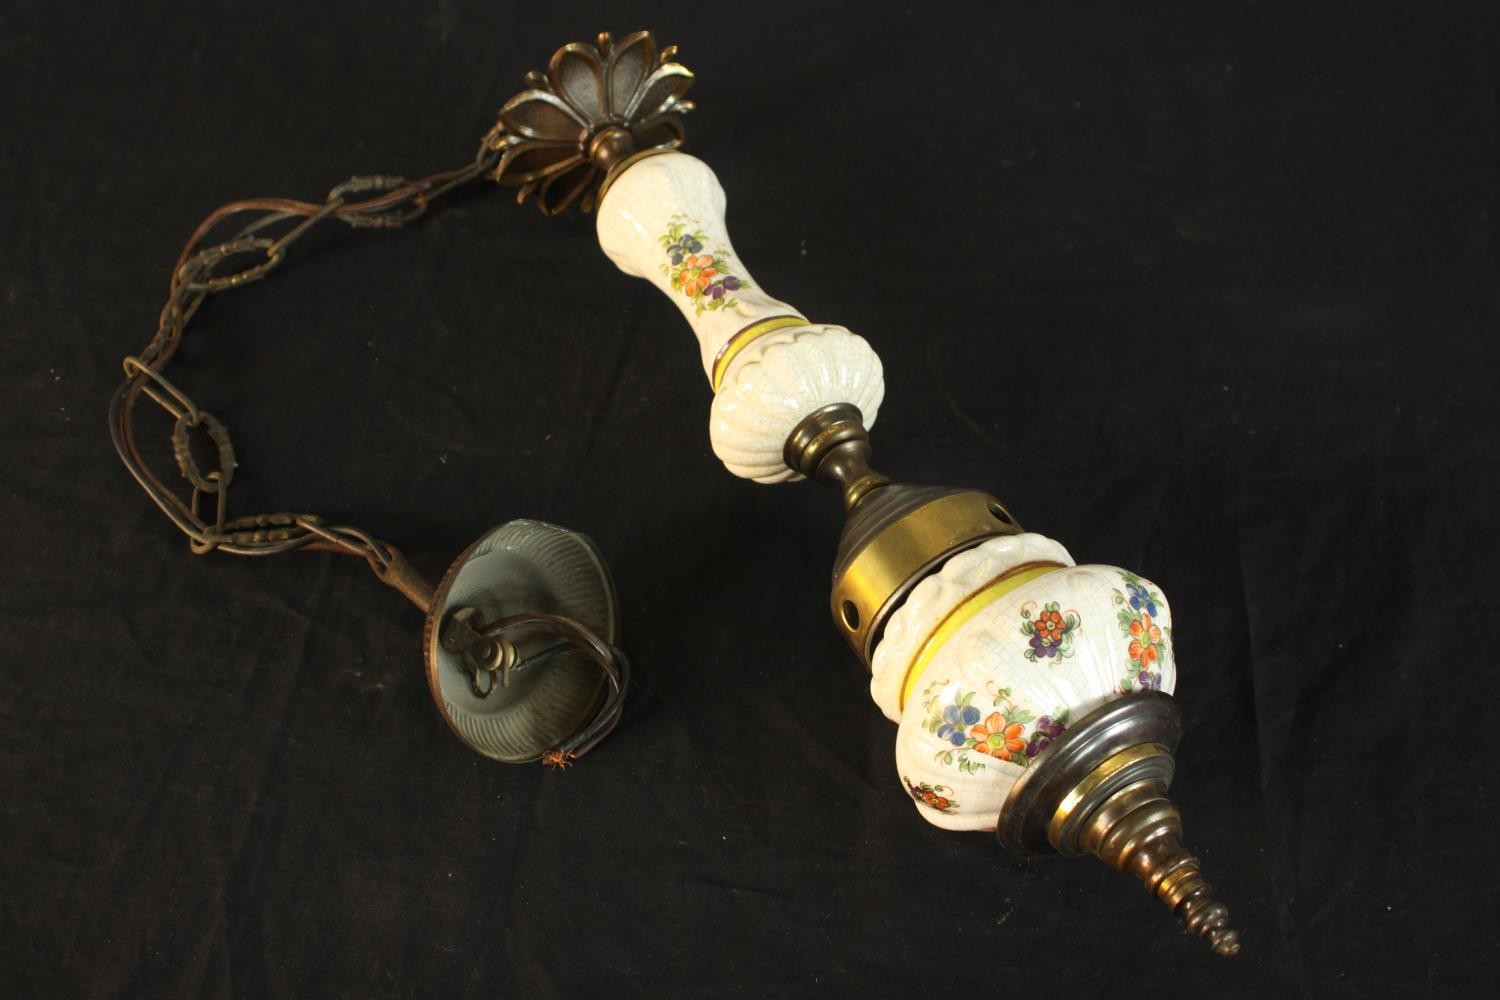 An early 20th century porcelain and brass ceiling pendant light, decorted with sprays of flowers.